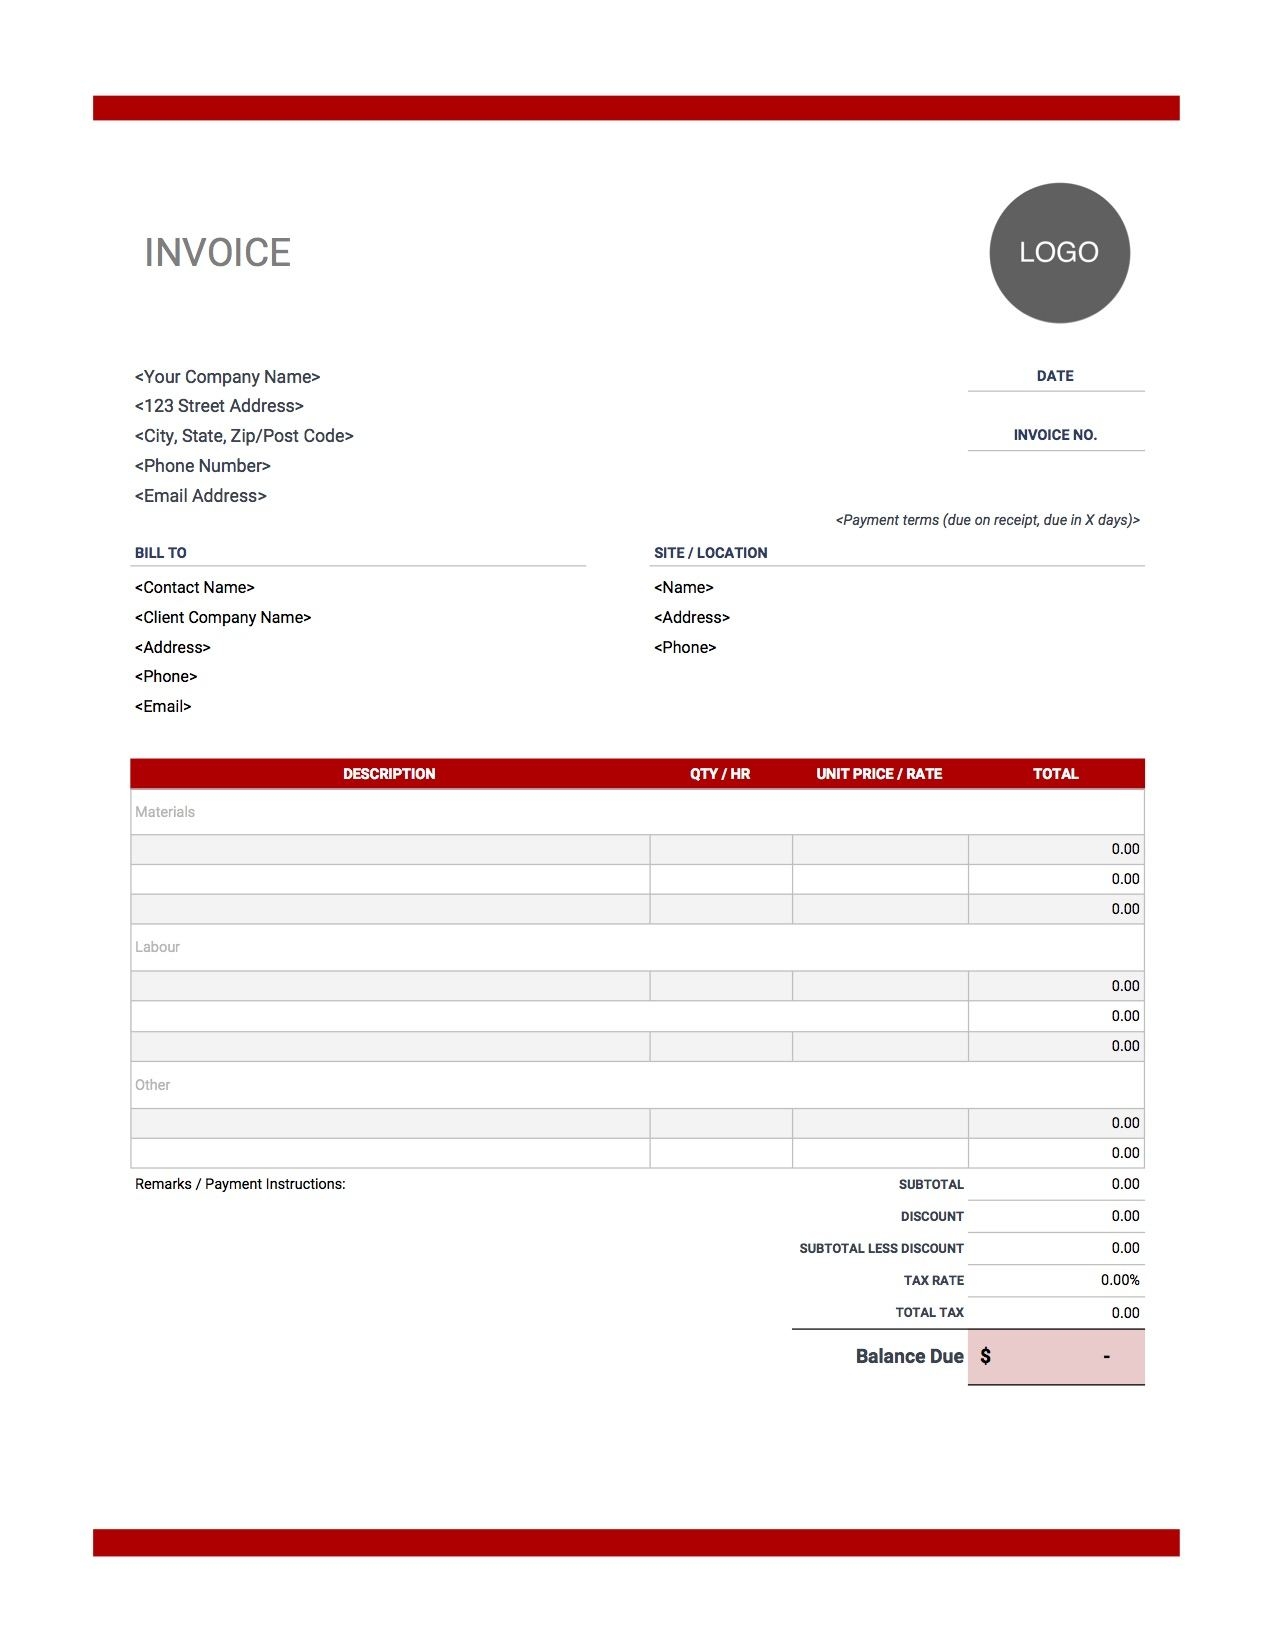 Format Of Final Invoice * Invoice Template Ideas